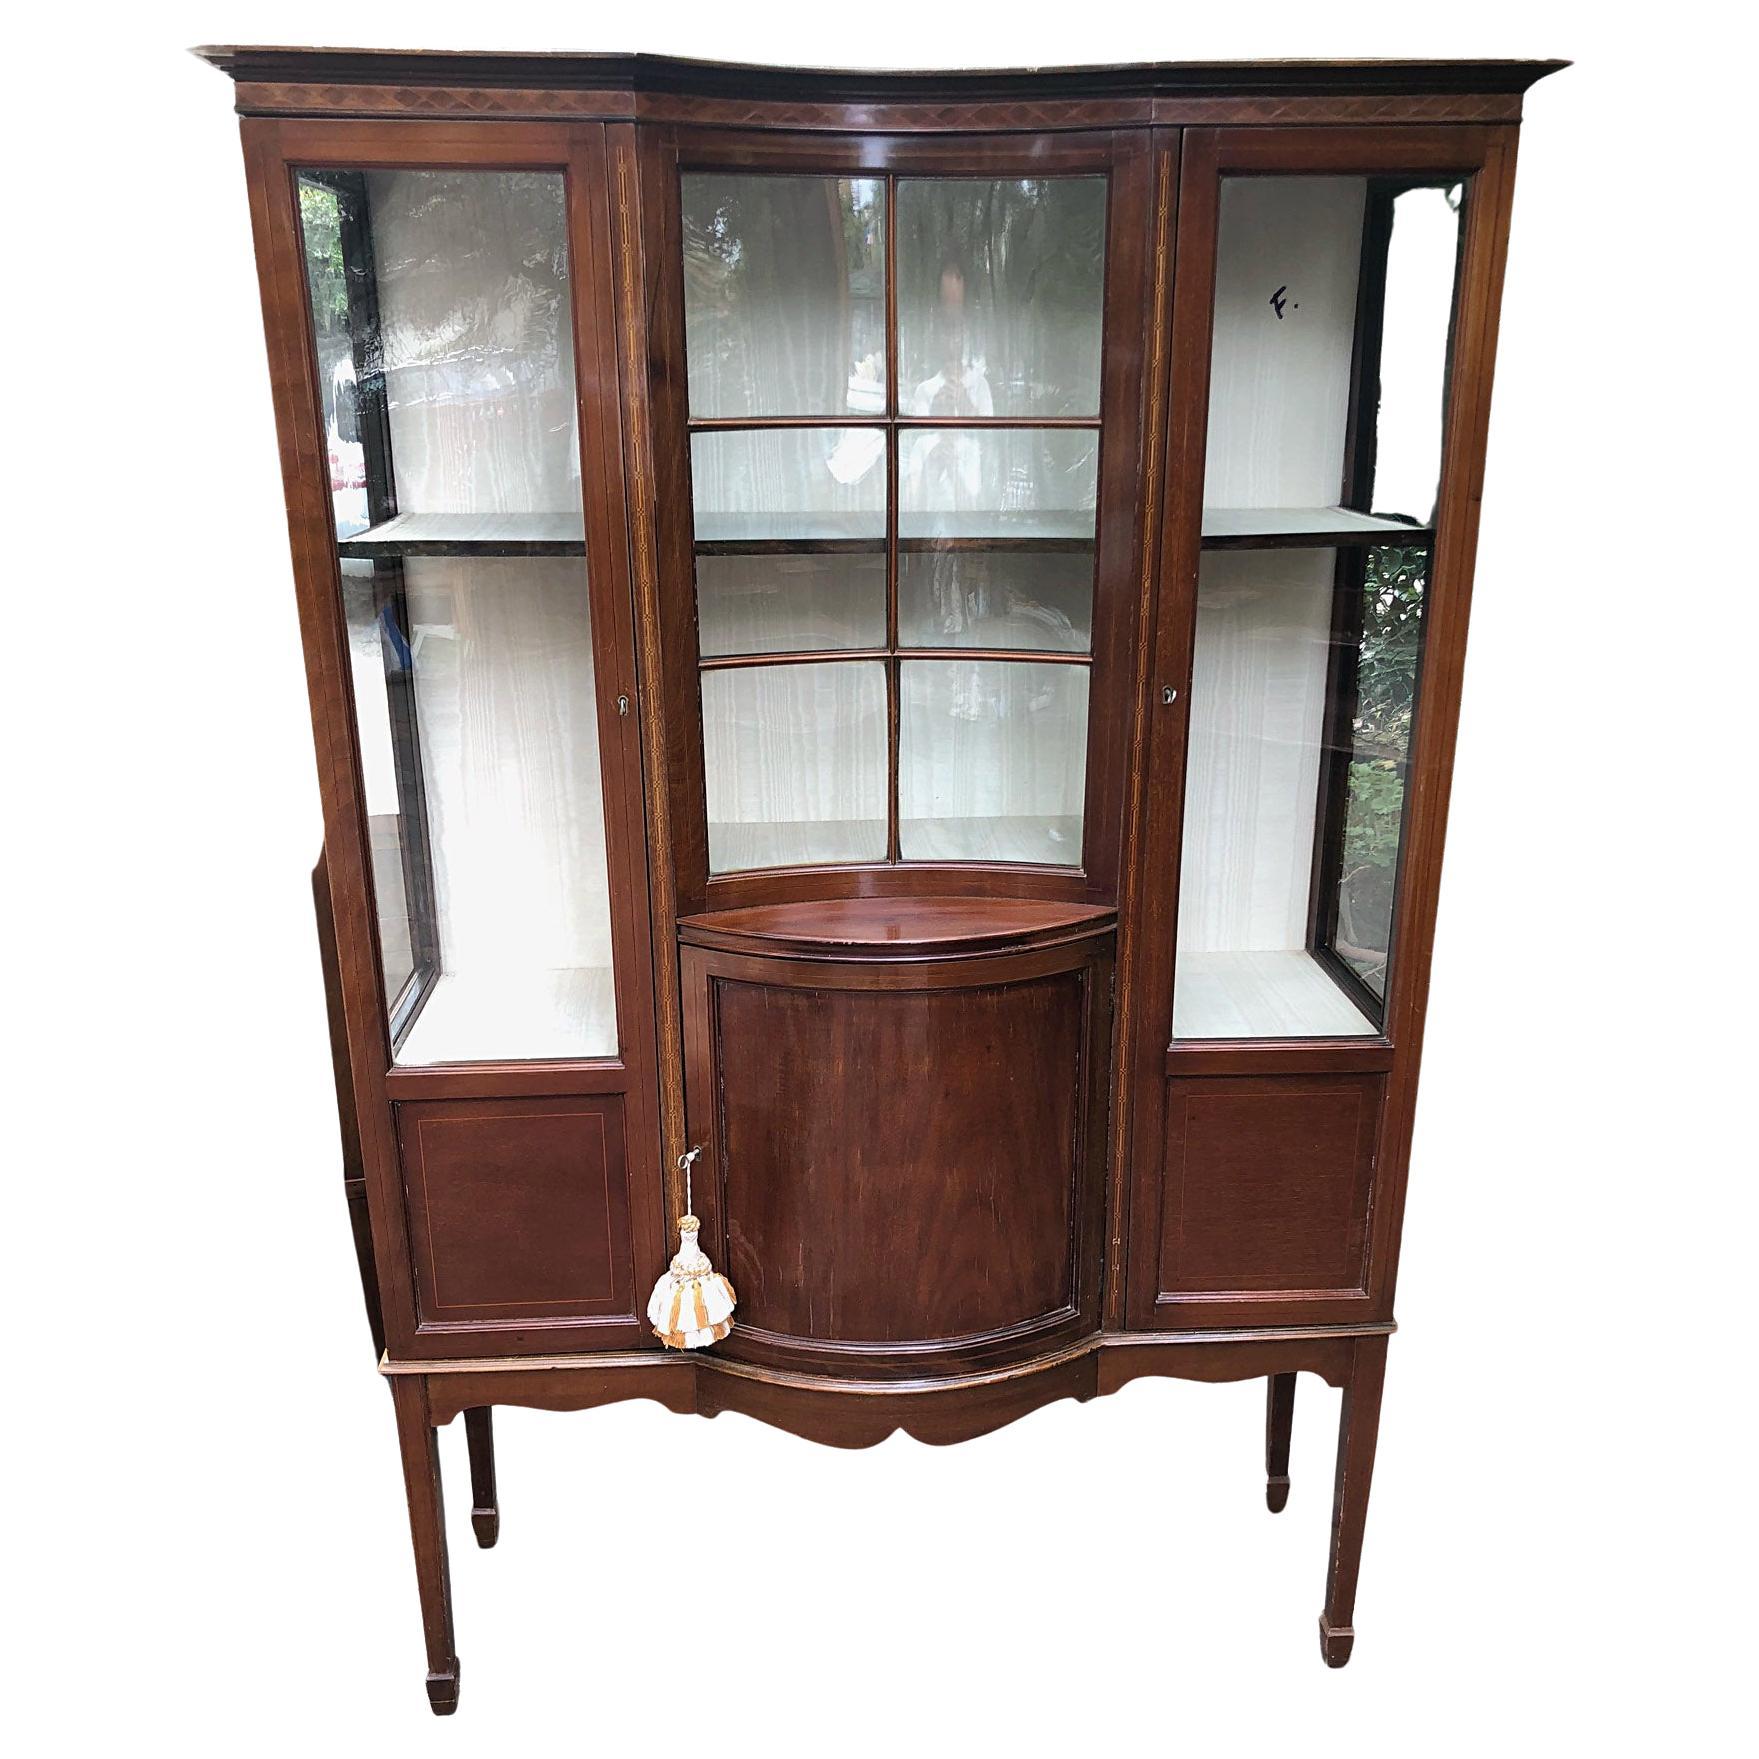 English Showcase with Three Doors in Mahogany, with Glass on Three Sides